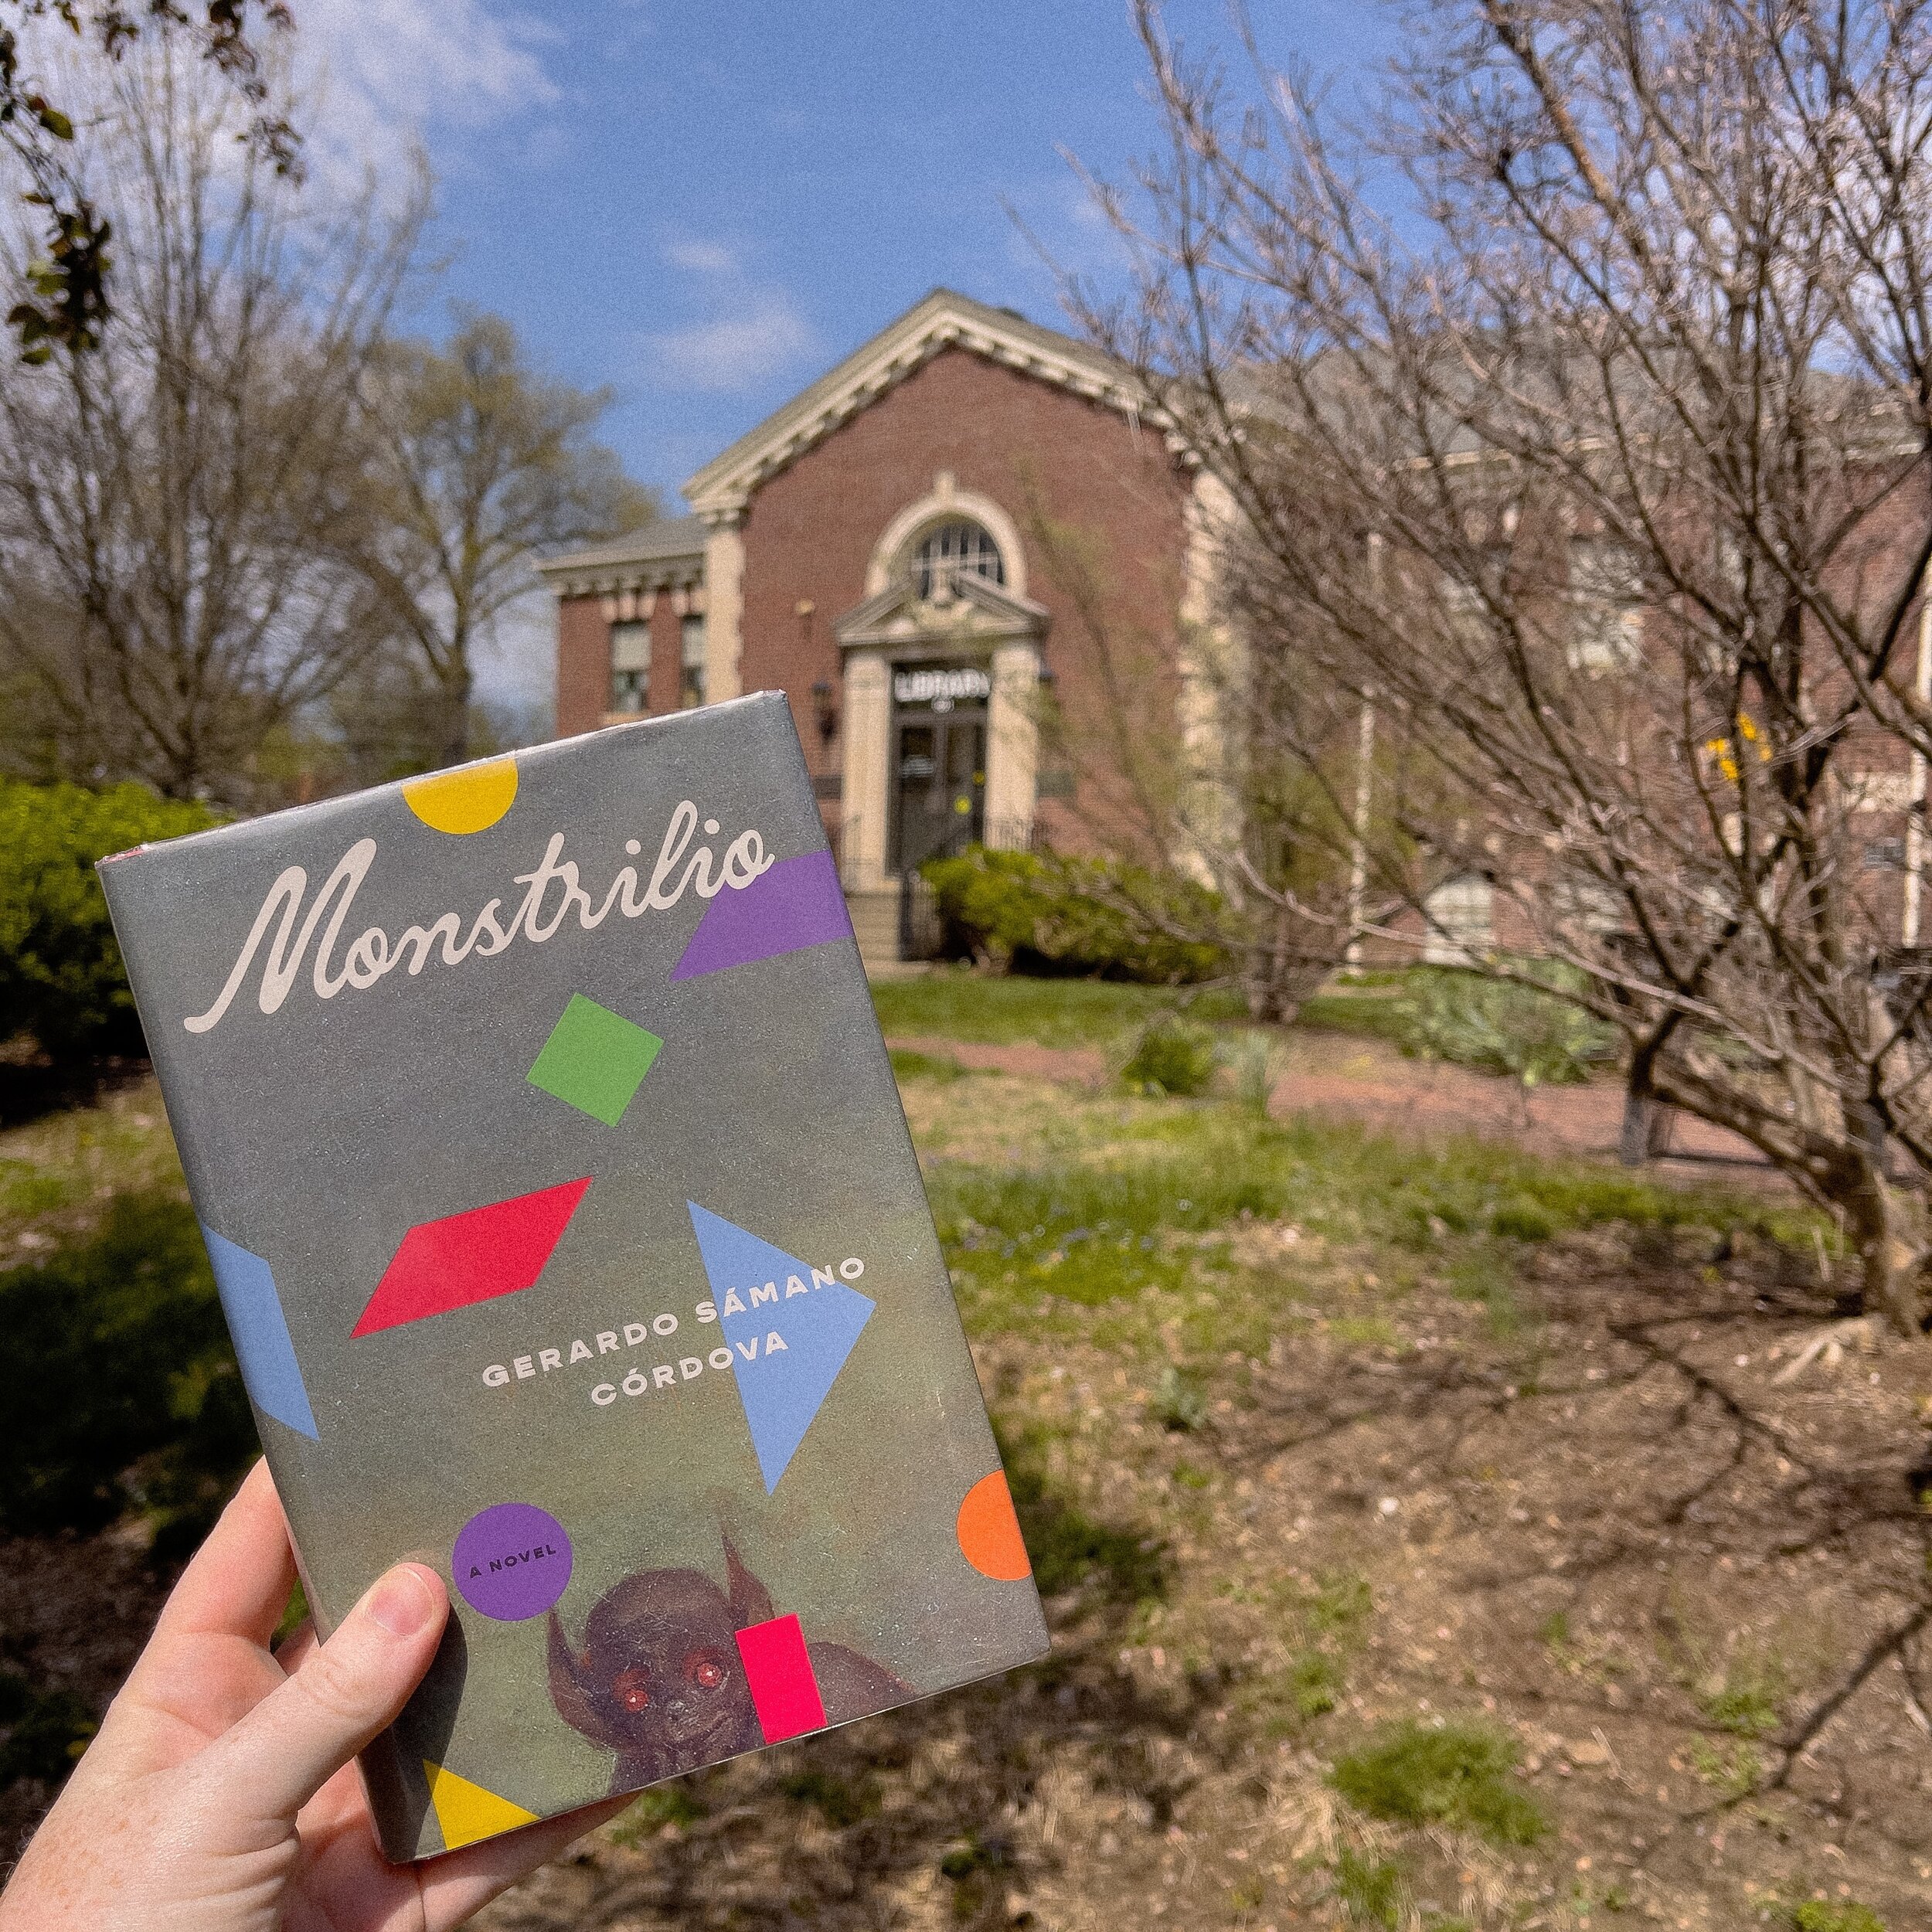 Picked up my copy of Monstrilio today from @louisvillefreepubliclibrary 🥰